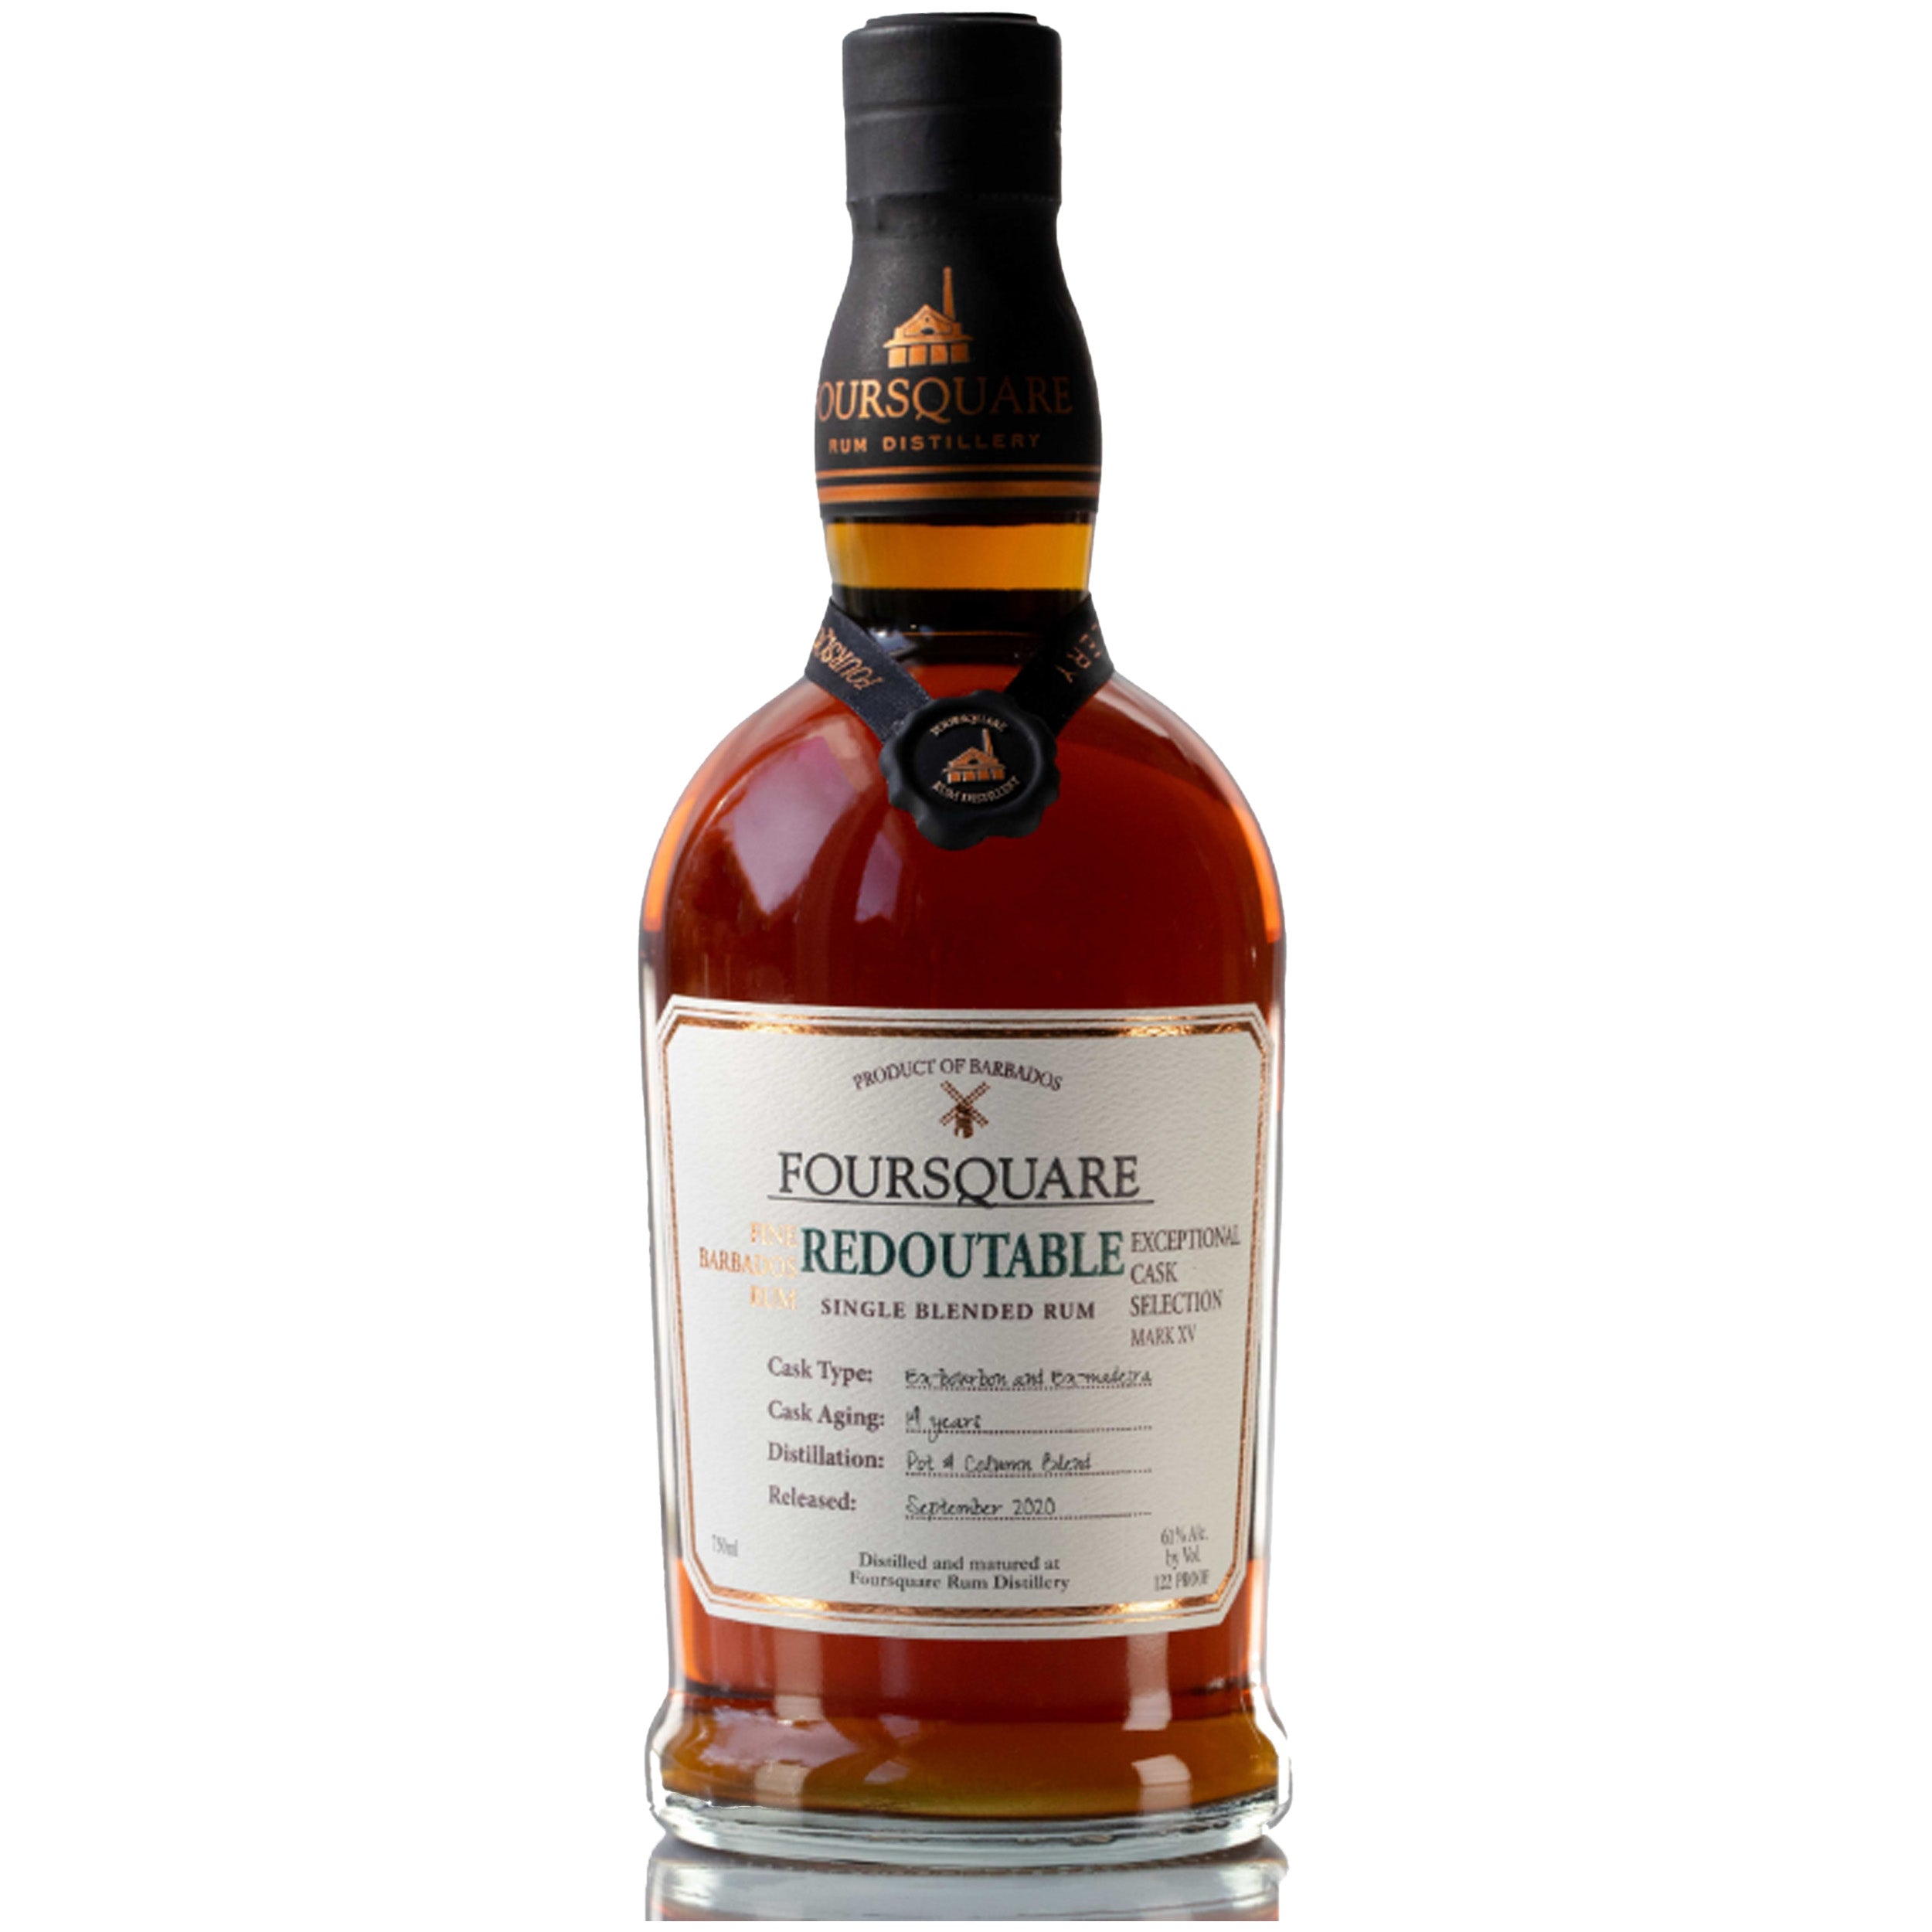 Foursquare Redoutable 14 Year Rum